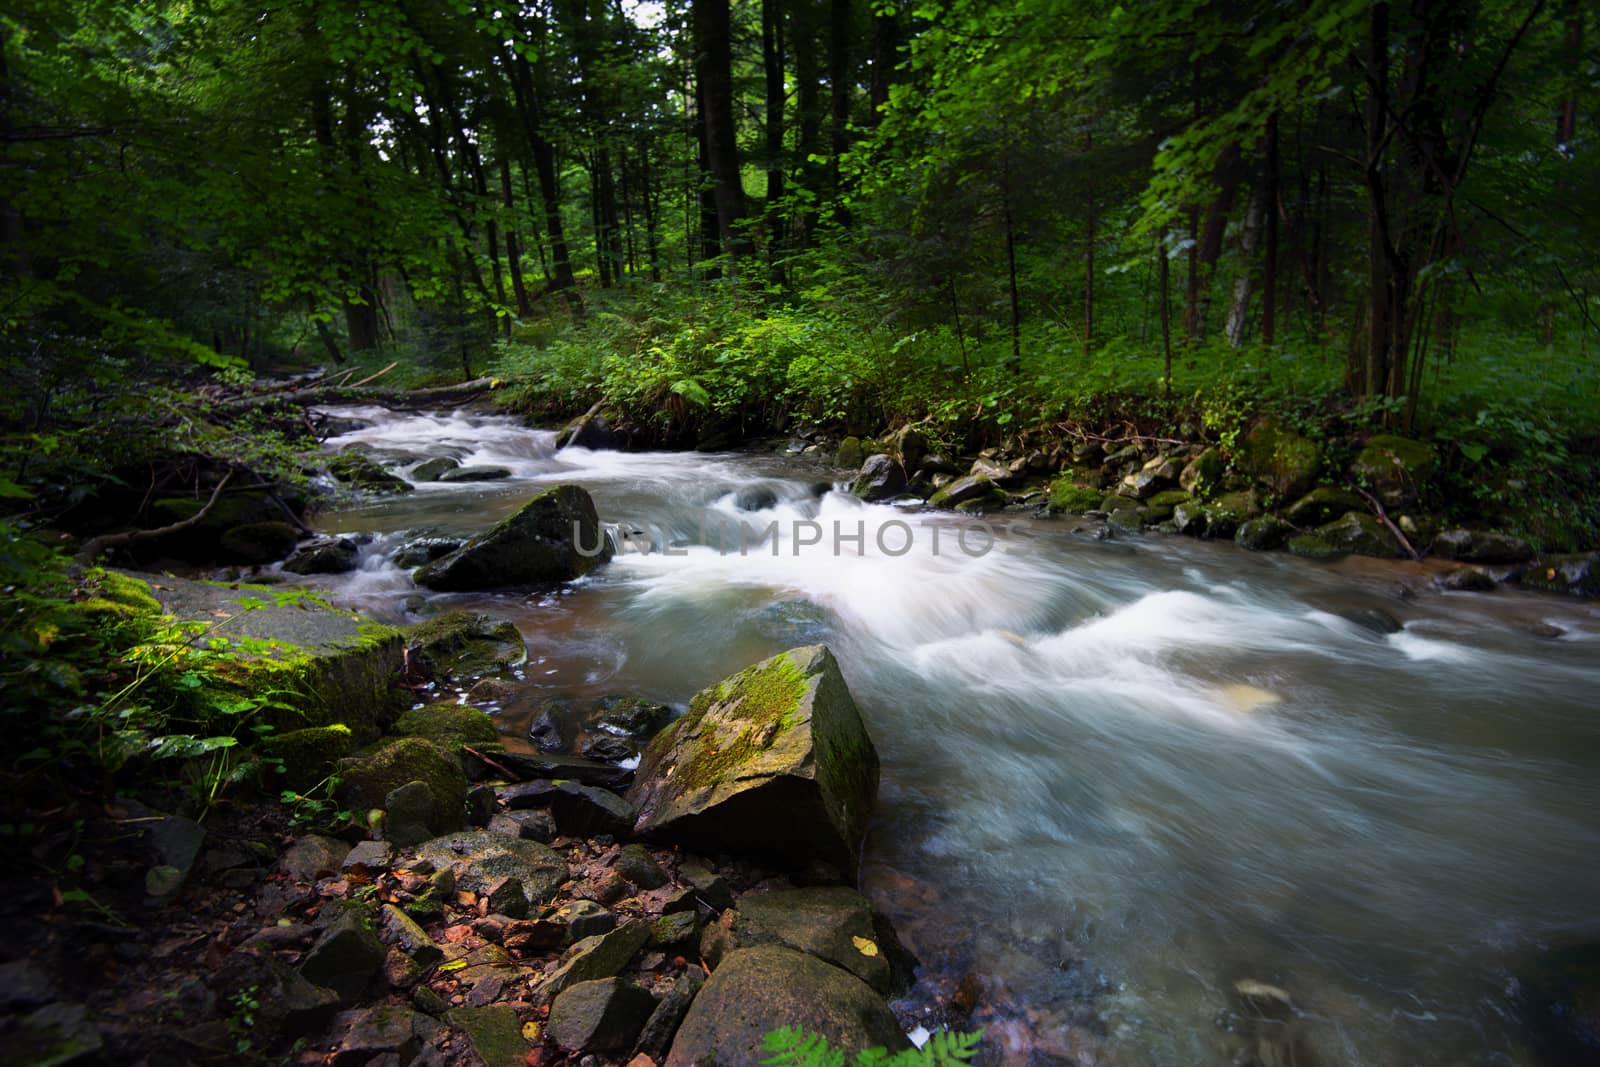 Mountain river - stream flowing through thick green forest. Stream in dense wood. Big boulders in river bed with fallen tree trunks covered in moss, rainforest in Europe, Bistriski Vintgar, Slovenia